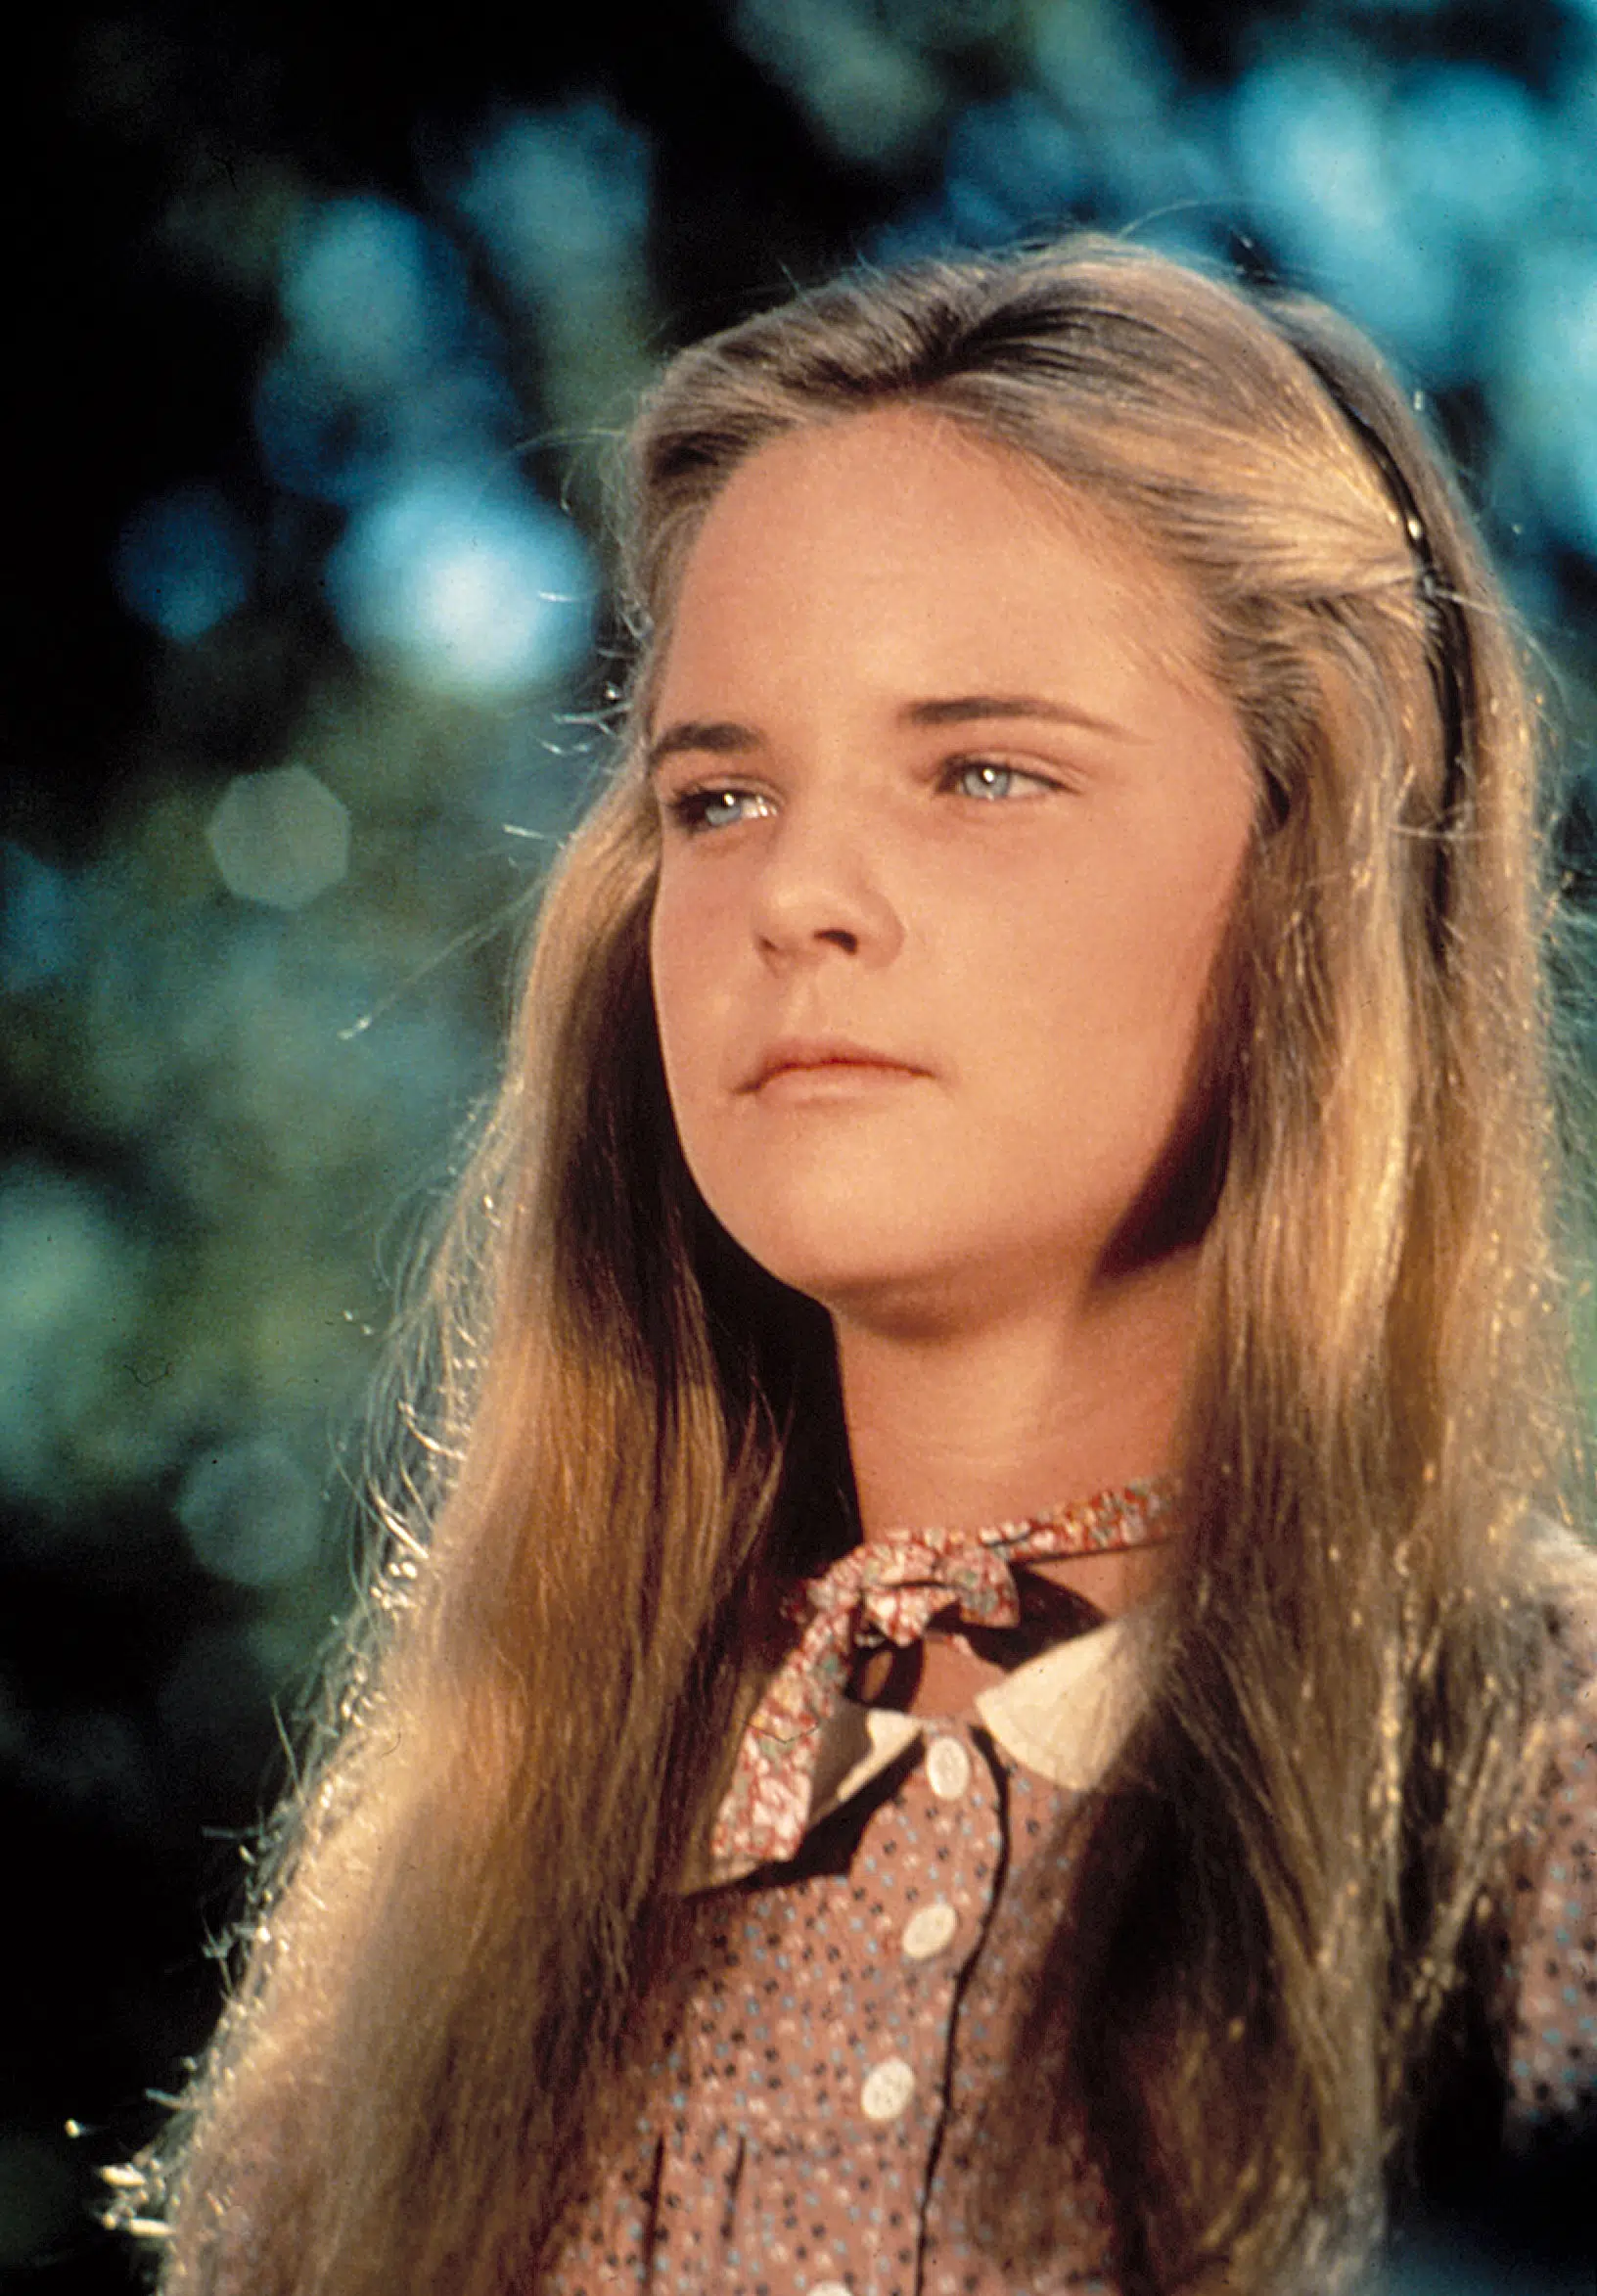 LITTLE HOUSE ON THE PRAIRIE, Melissa Sue Anderson, 1974-1983